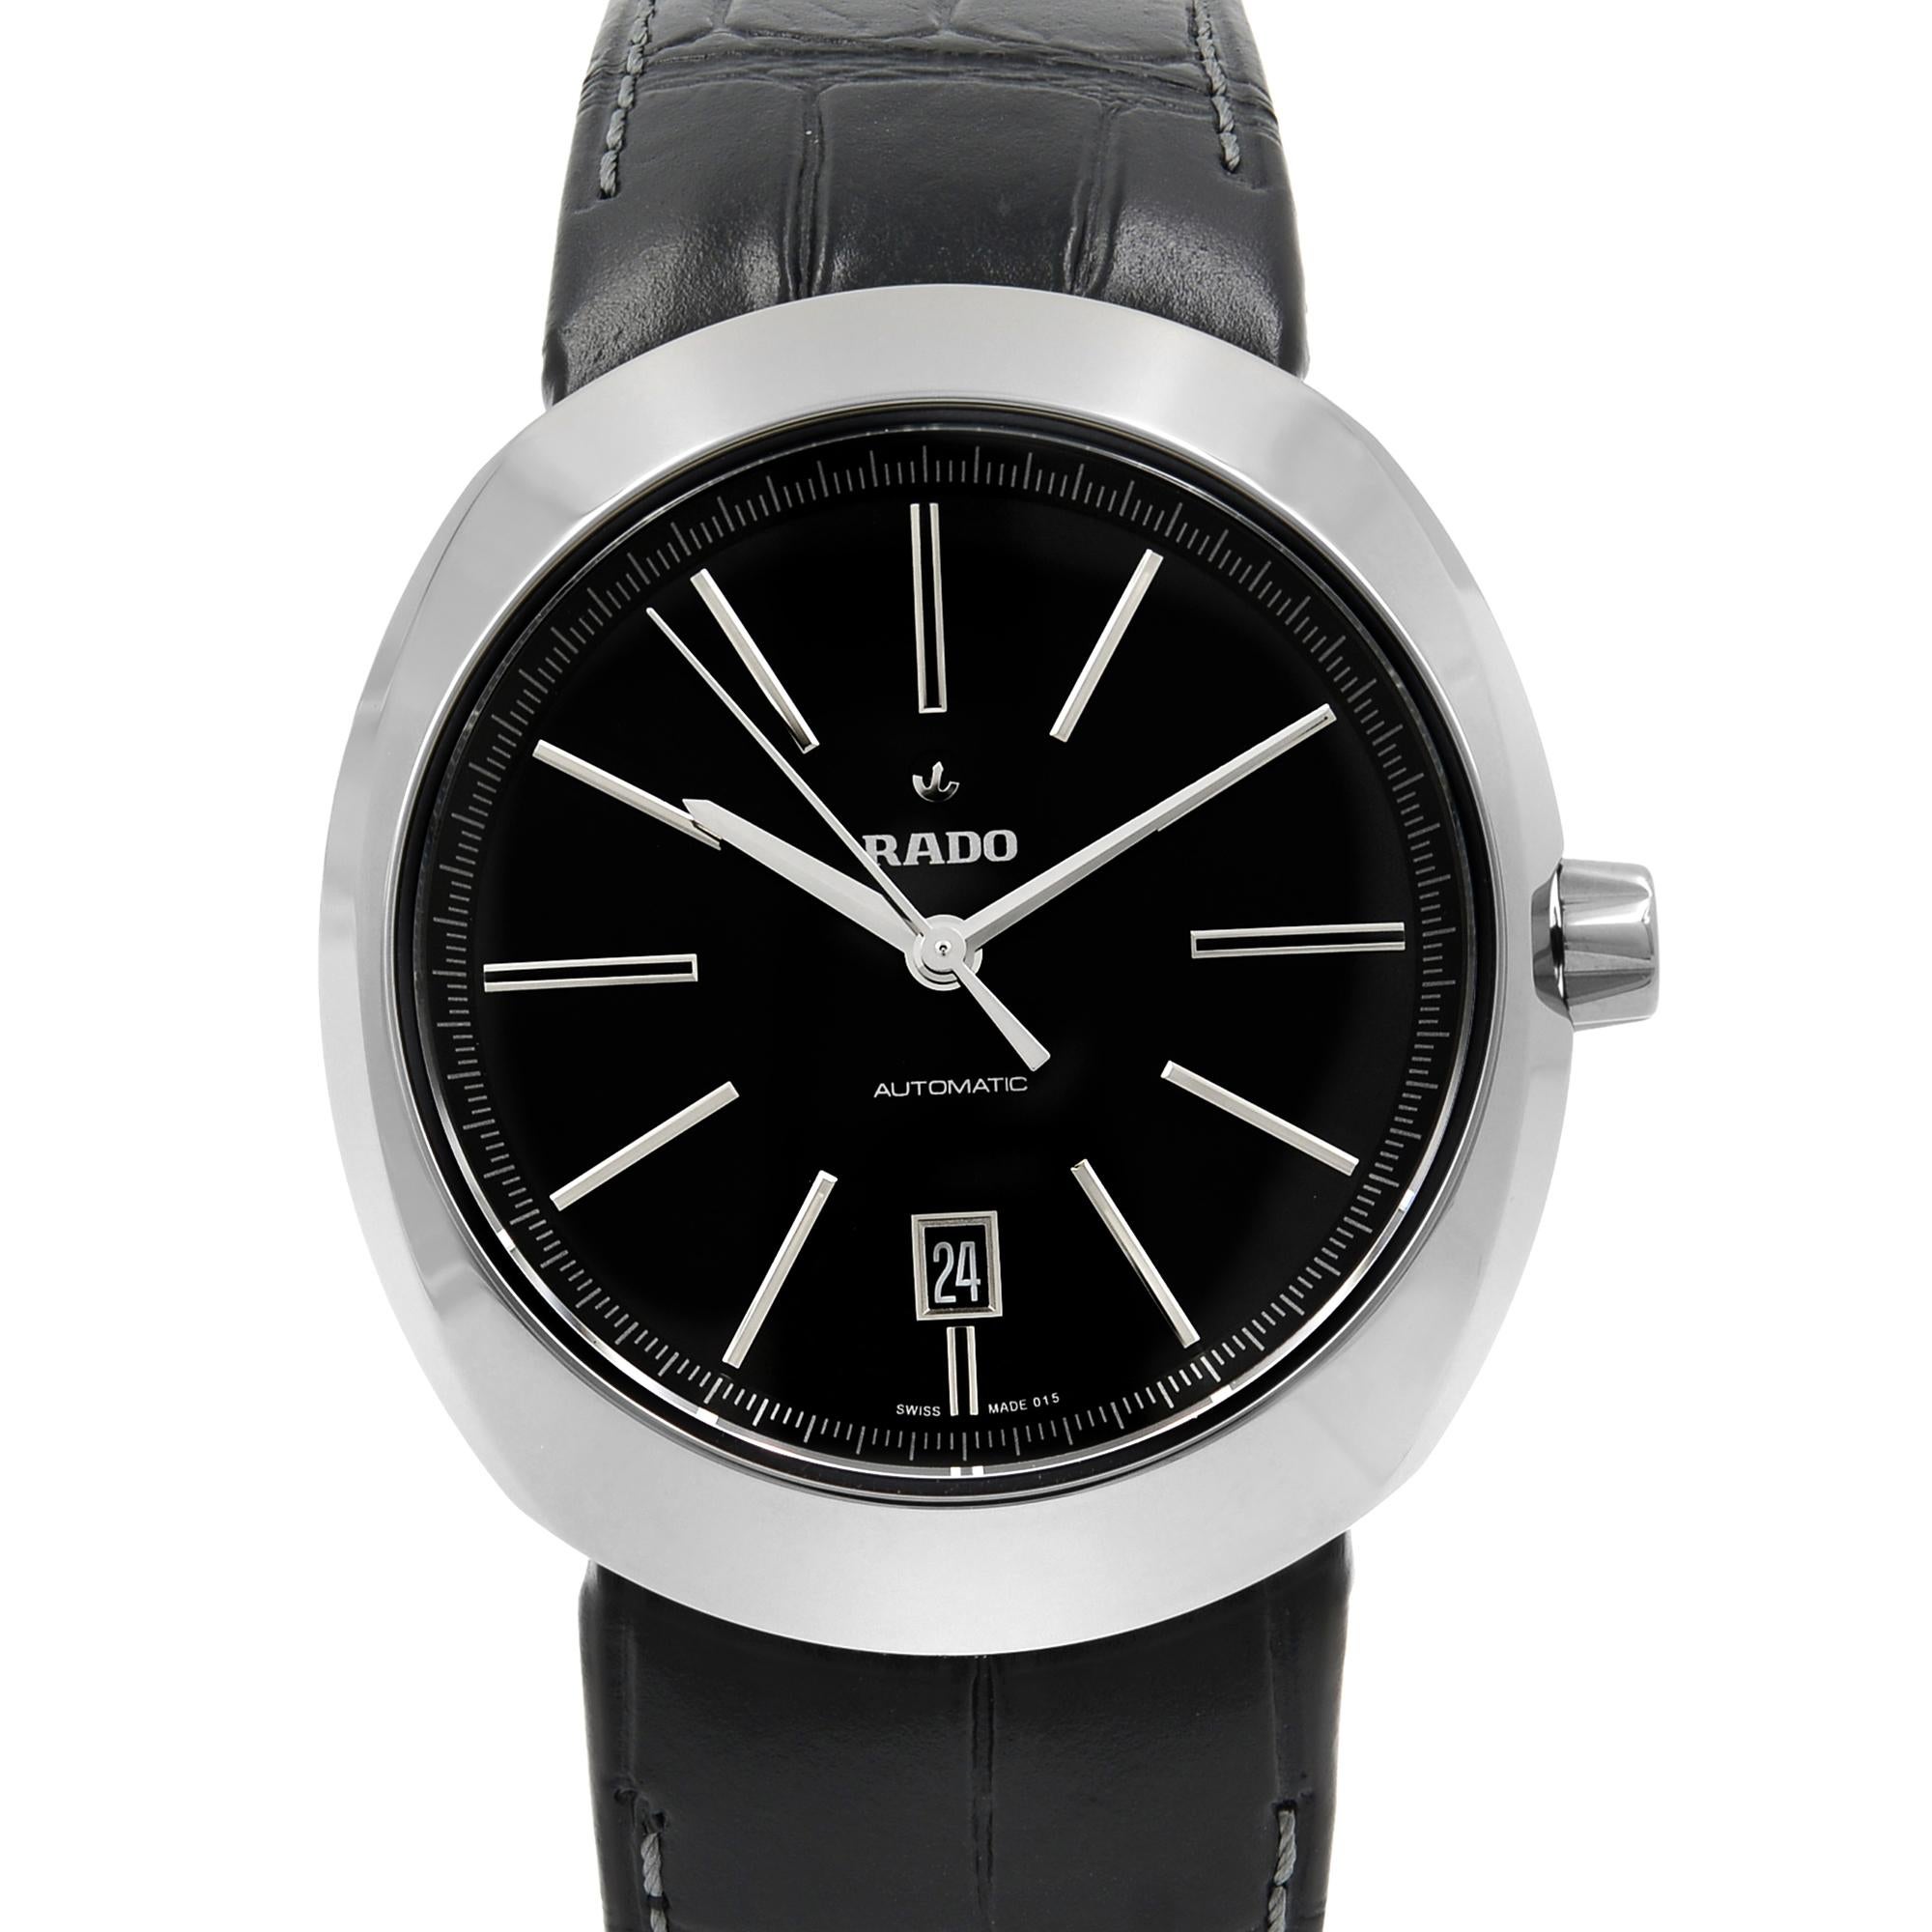 This brand new Rado D-Star R15760155 is a beautiful men's timepiece that is powered by an automatic movement which is cased in a ceramic case. It has a round shape face, date dial and has hand sticks style markers. It is completed with a leather